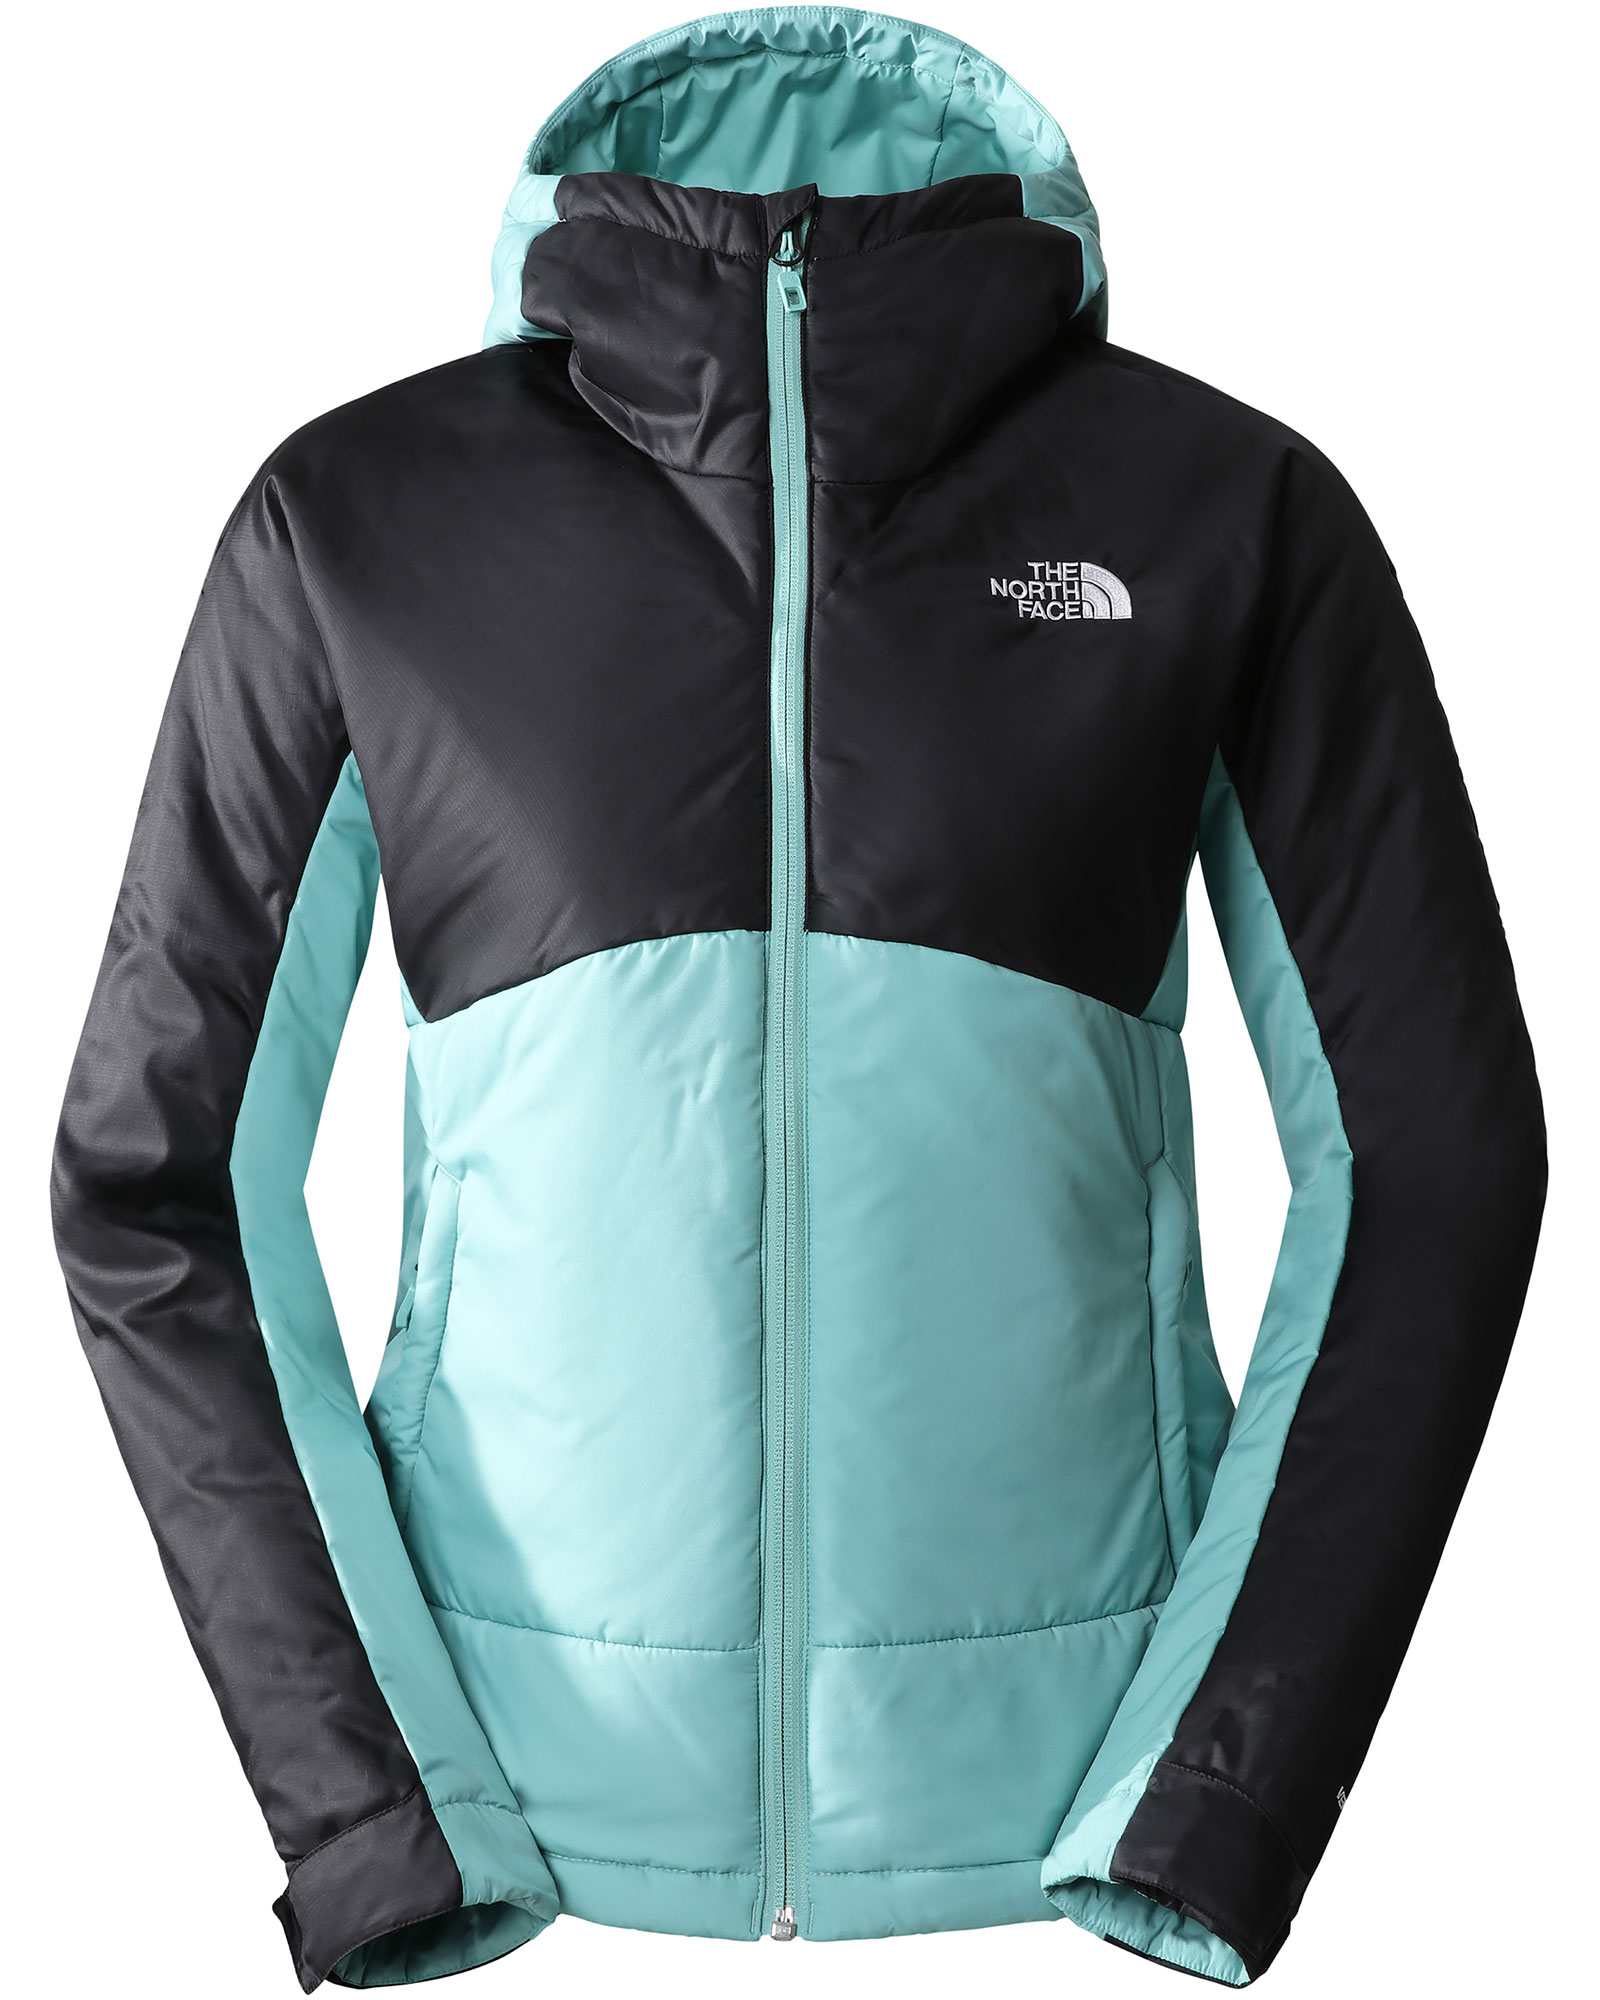 The North Face Circular Hybrid Women’s Insulated Jacket - Wasabi M